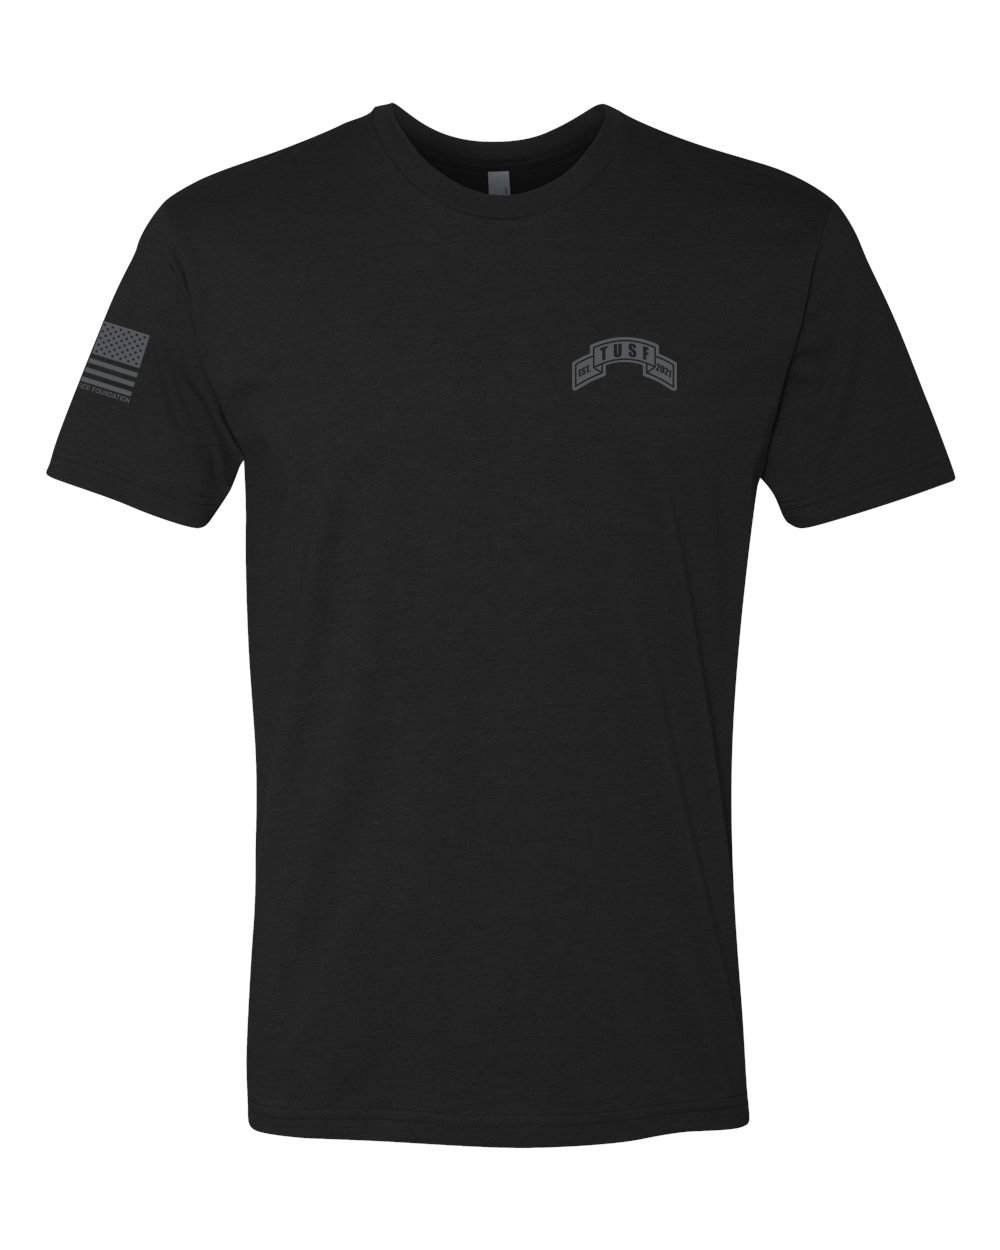 Black Ops T-Shirt — The Ultimate Sacrifice Foundation